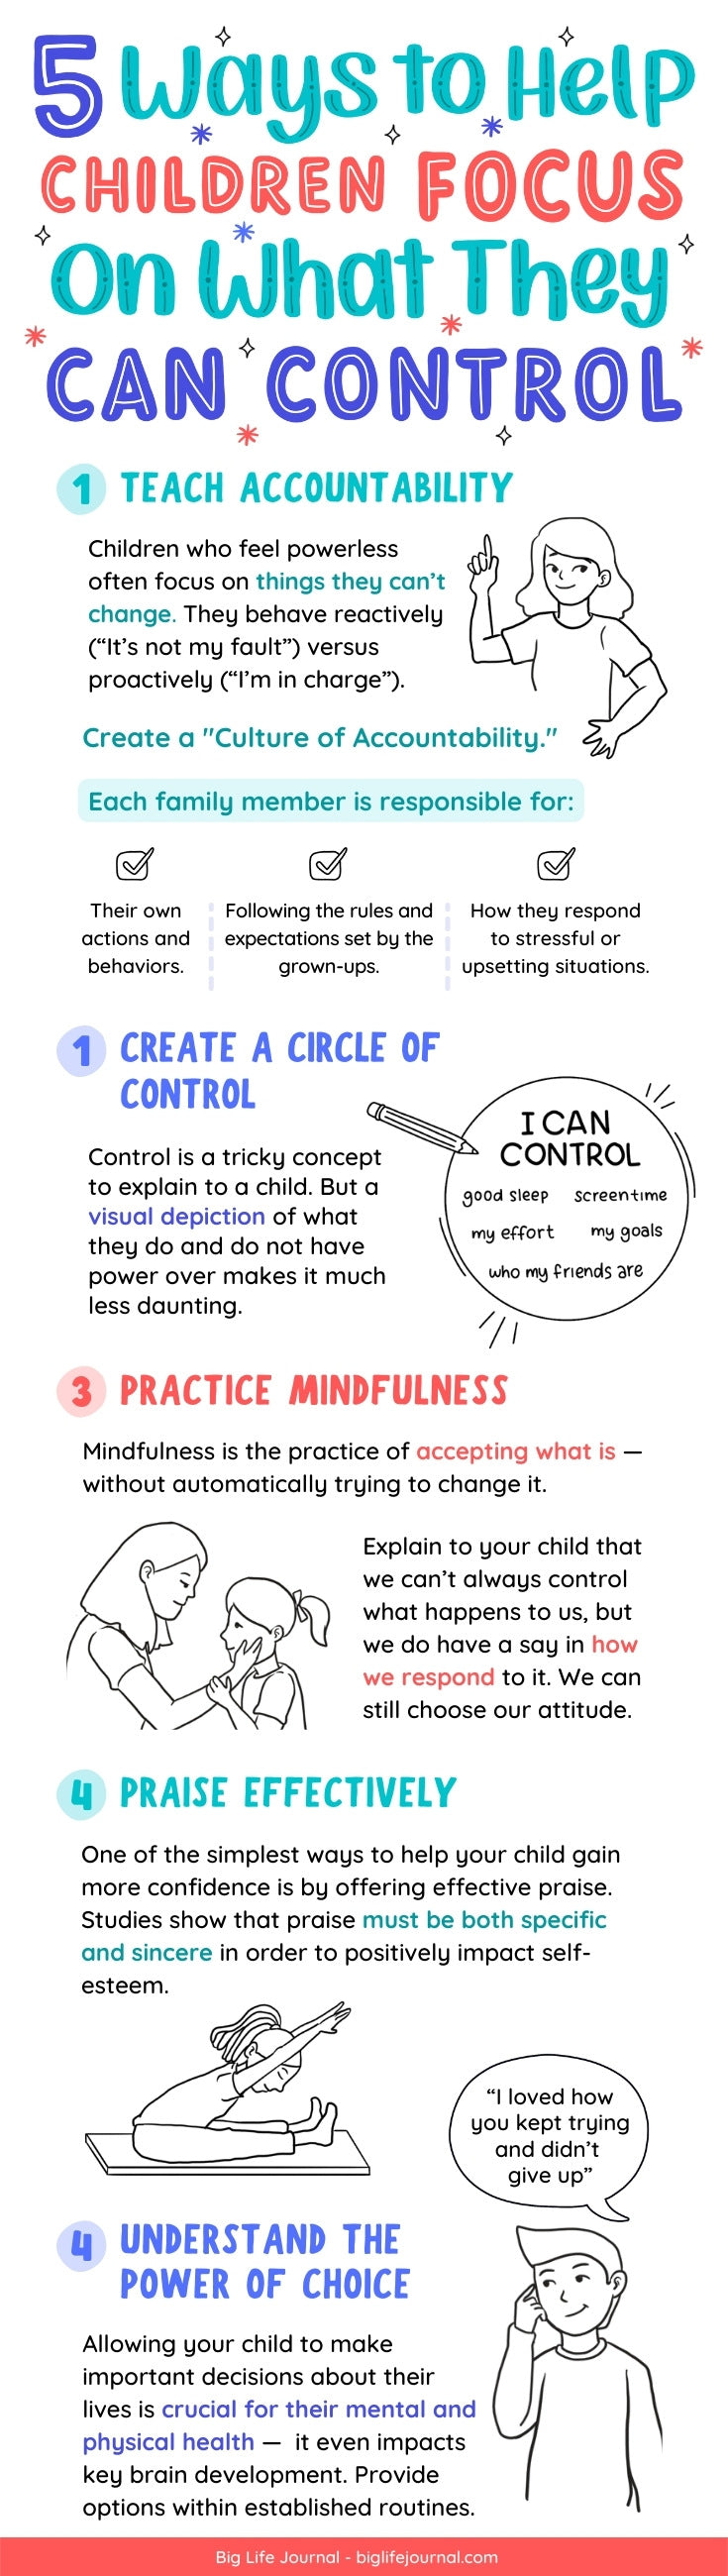 5 Ways to help children focus on what they can control